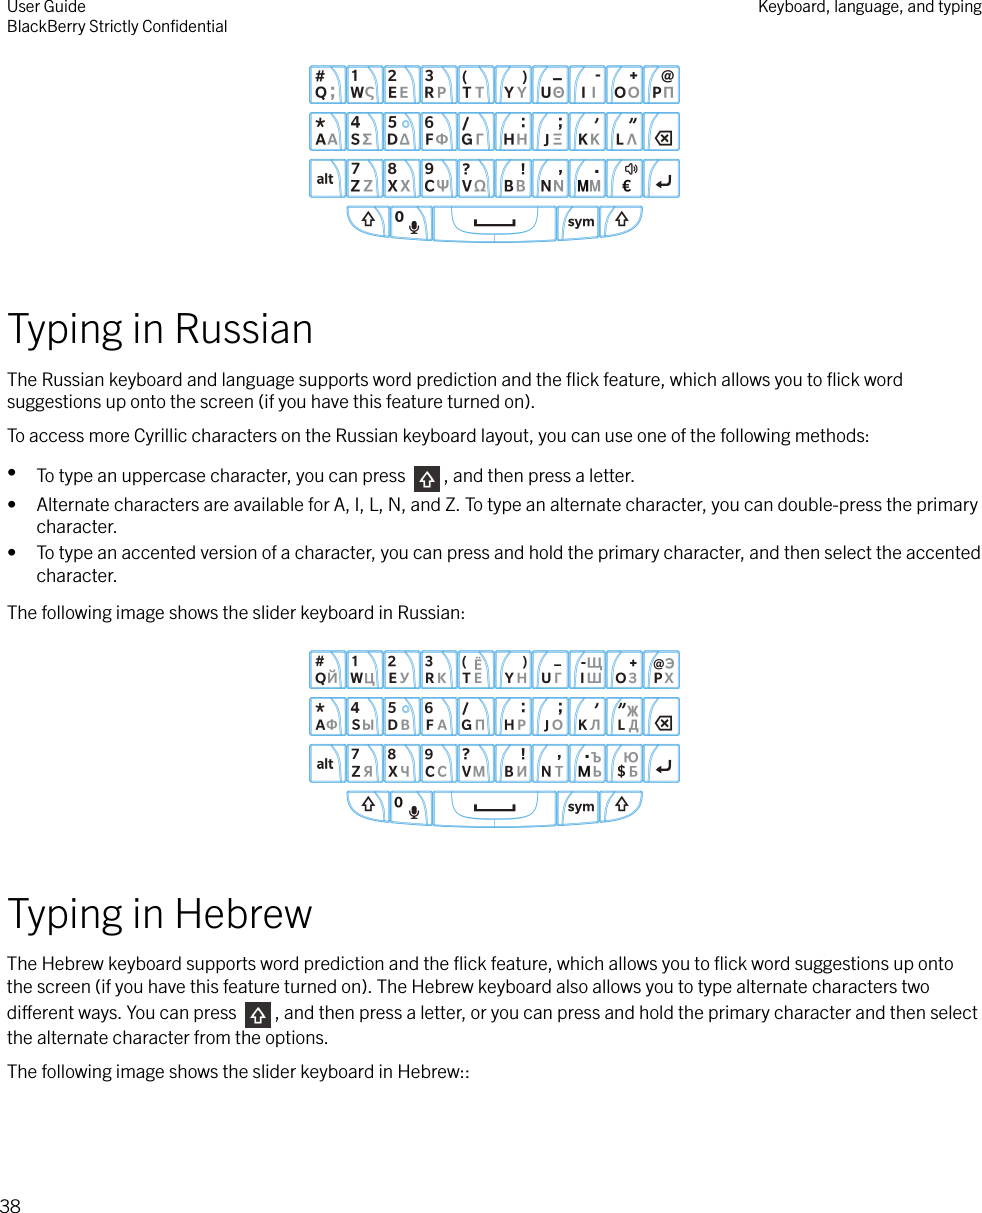  Typing in RussianThe Russian keyboard and language supports word prediction and the ﬂick feature, which allows you to ﬂick wordsuggestions up onto the screen (if you have this feature turned on).To access more Cyrillic characters on the Russian keyboard layout, you can use one of the following methods:•To type an uppercase character, you can press  , and then press a letter.• Alternate characters are available for A, I, L, N, and Z. To type an alternate character, you can double-press the primarycharacter.• To type an accented version of a character, you can press and hold the primary character, and then select the accentedcharacter.The following image shows the slider keyboard in Russian:  Typing in HebrewThe Hebrew keyboard supports word prediction and the ﬂick feature, which allows you to ﬂick word suggestions up ontothe screen (if you have this feature turned on). The Hebrew keyboard also allows you to type alternate characters twodierent ways. You can press  , and then press a letter, or you can press and hold the primary character and then selectthe alternate character from the options.The following image shows the slider keyboard in Hebrew:: User GuideBlackBerry Strictly ConﬁdentialKeyboard, language, and typing38